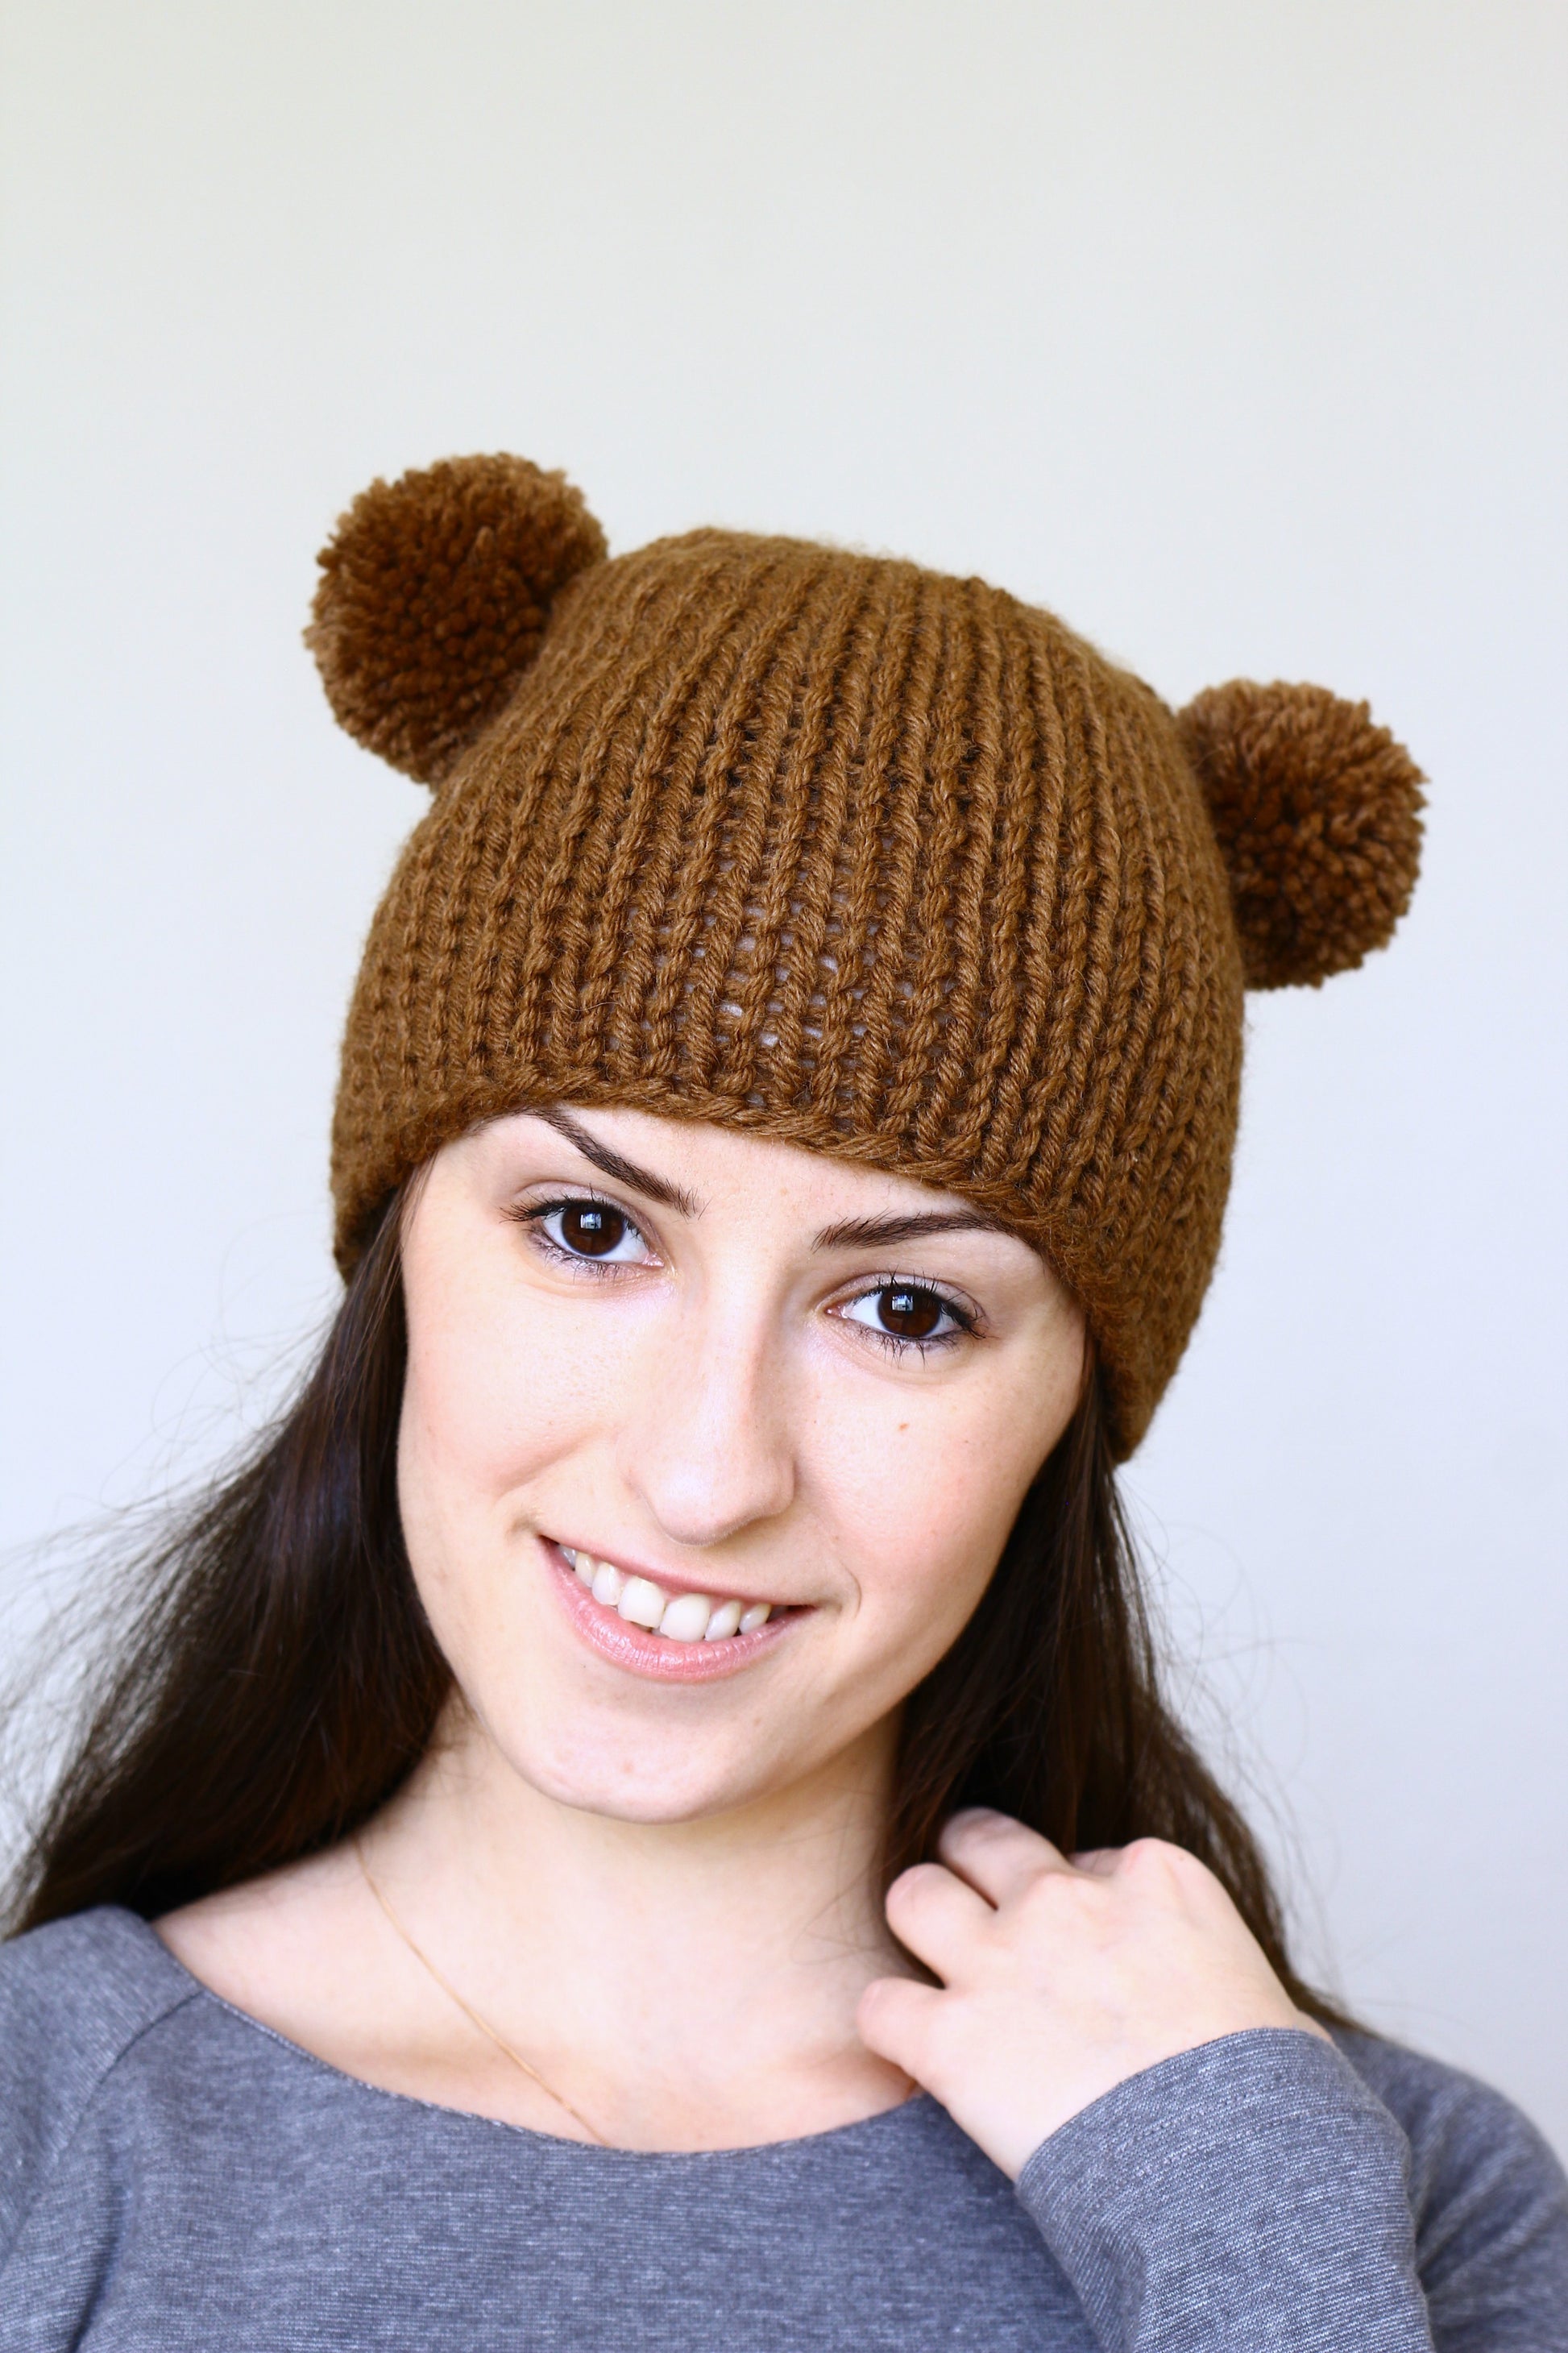 Knit hat with two poms, knit skull hat in chocolate brown color